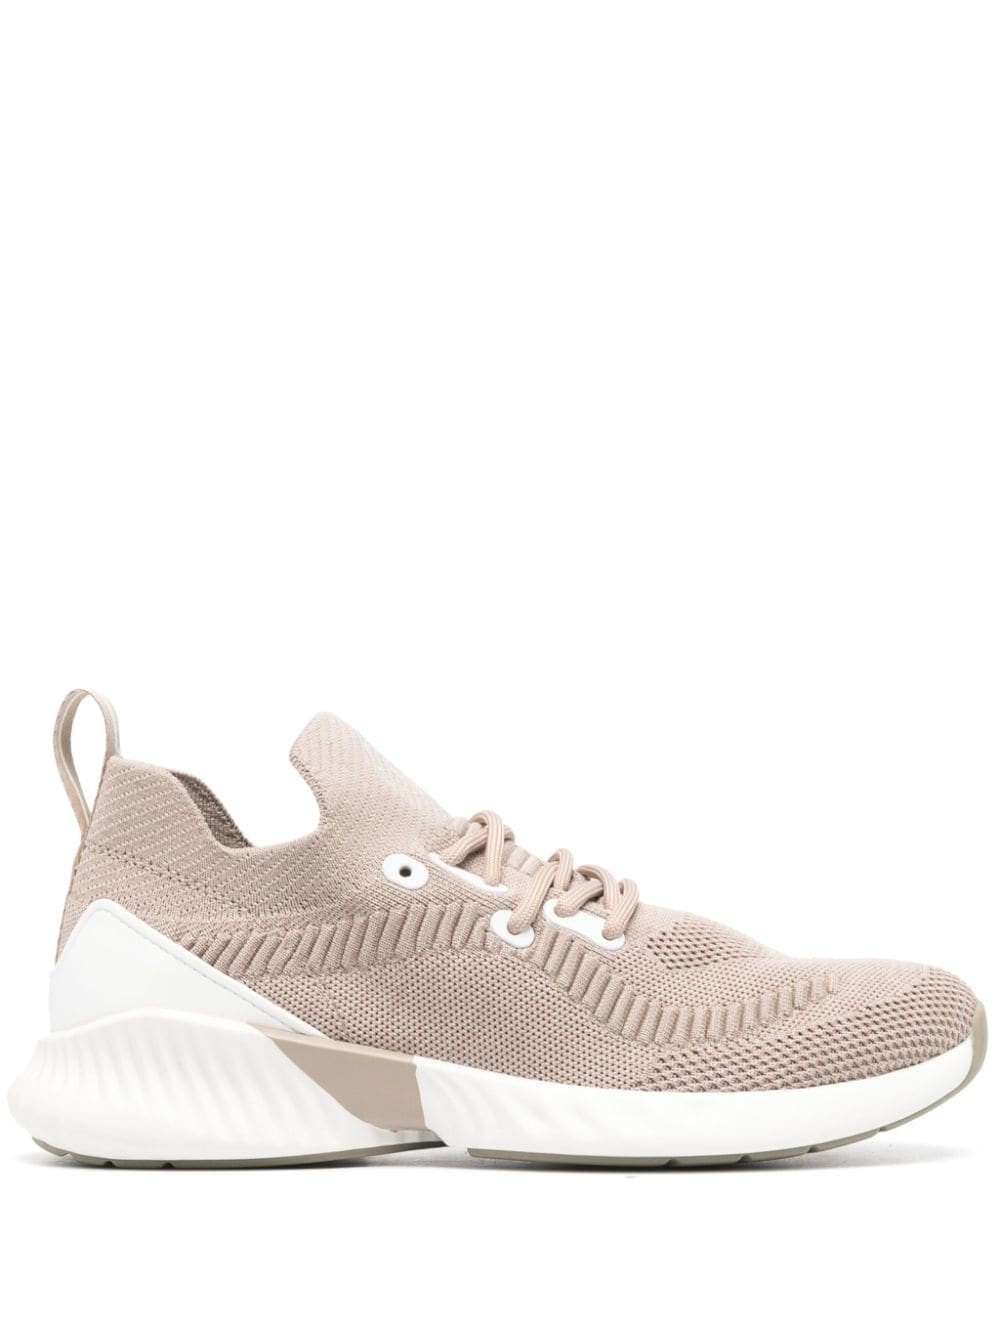 Boggi Milano Willow Panelled Sneakers In Nude